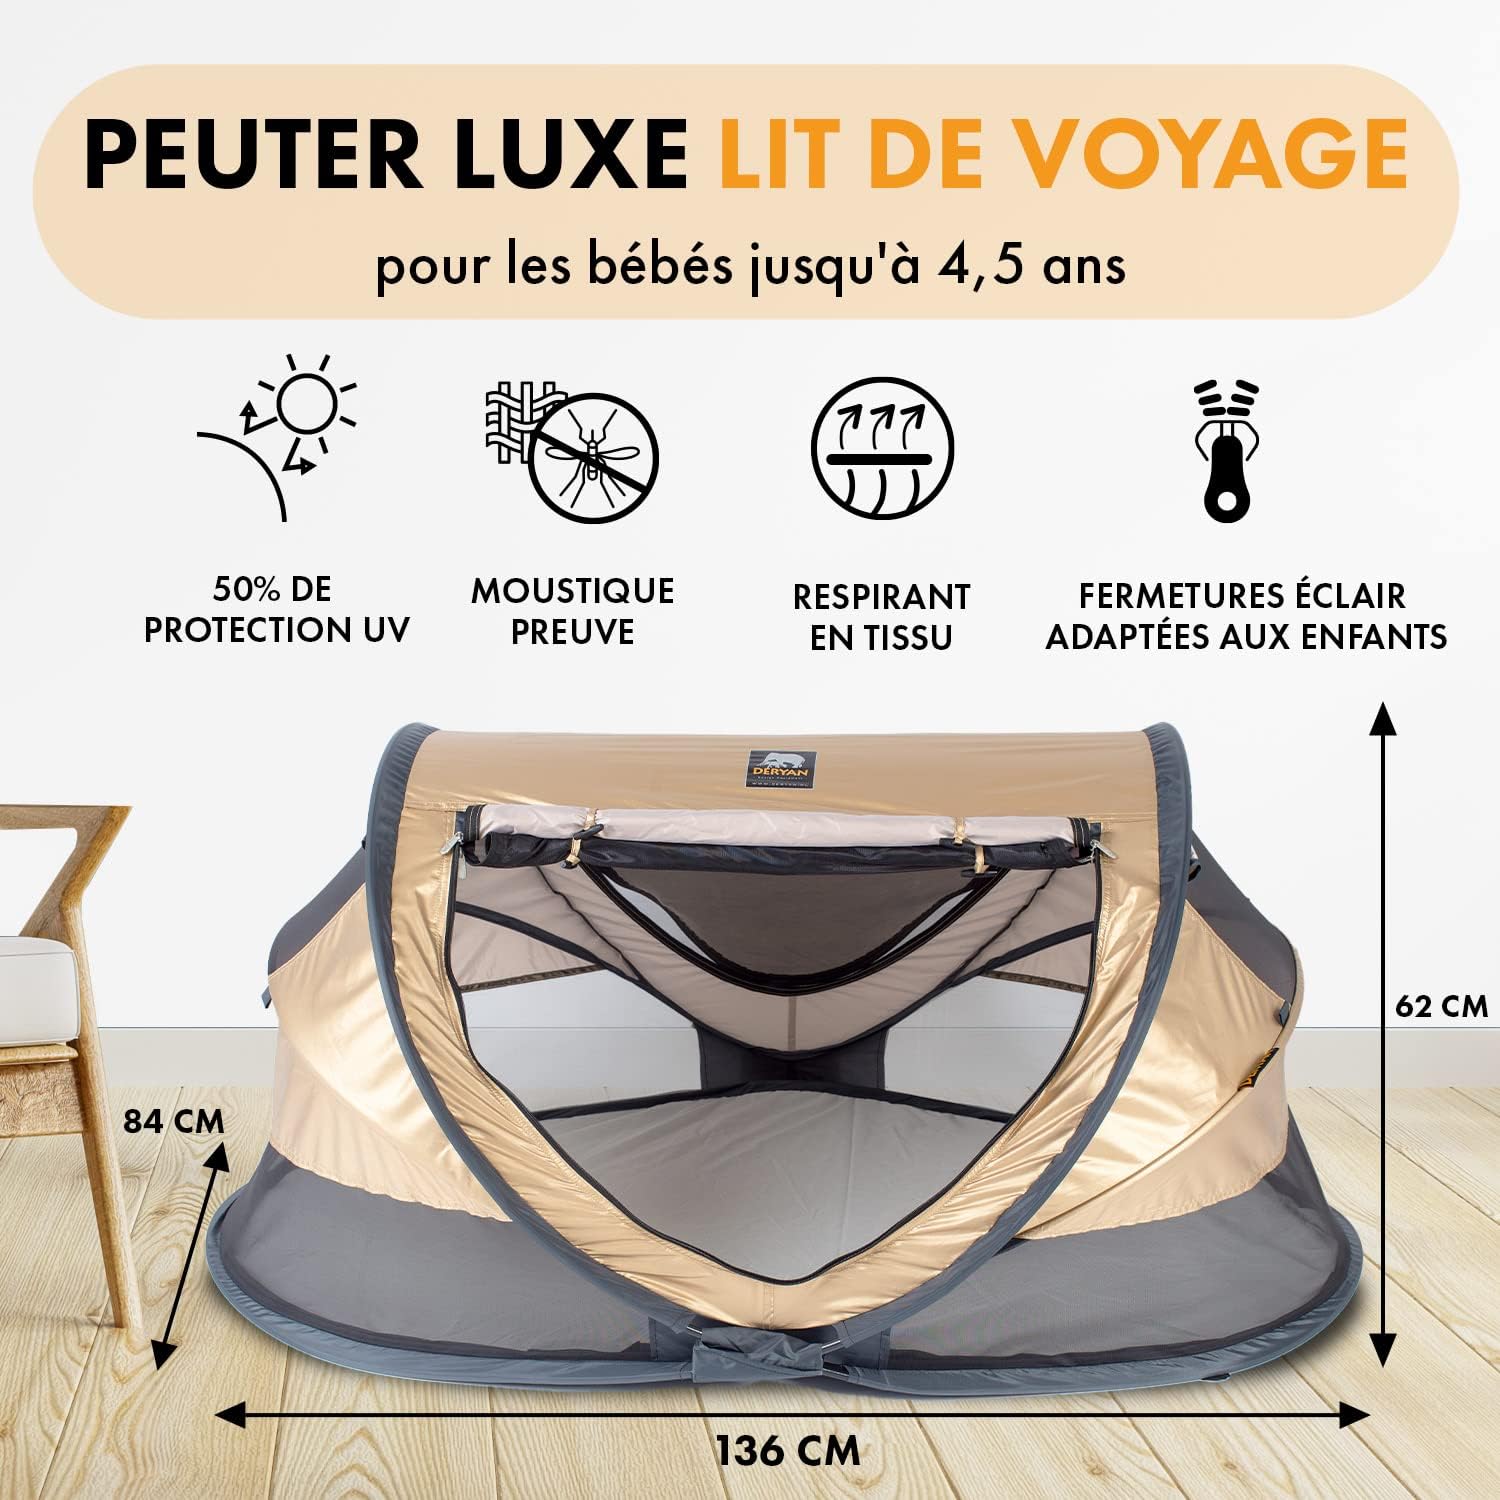 Deryan Toddler Travel Cot with Mattress from Birth to 2.5 Years – Pop Up Toddler Cot Baby Tent set up in 2 Minutes – Includes: Mosquito Net & Travel Bag 136 x 84 x 62 cm (Cream).